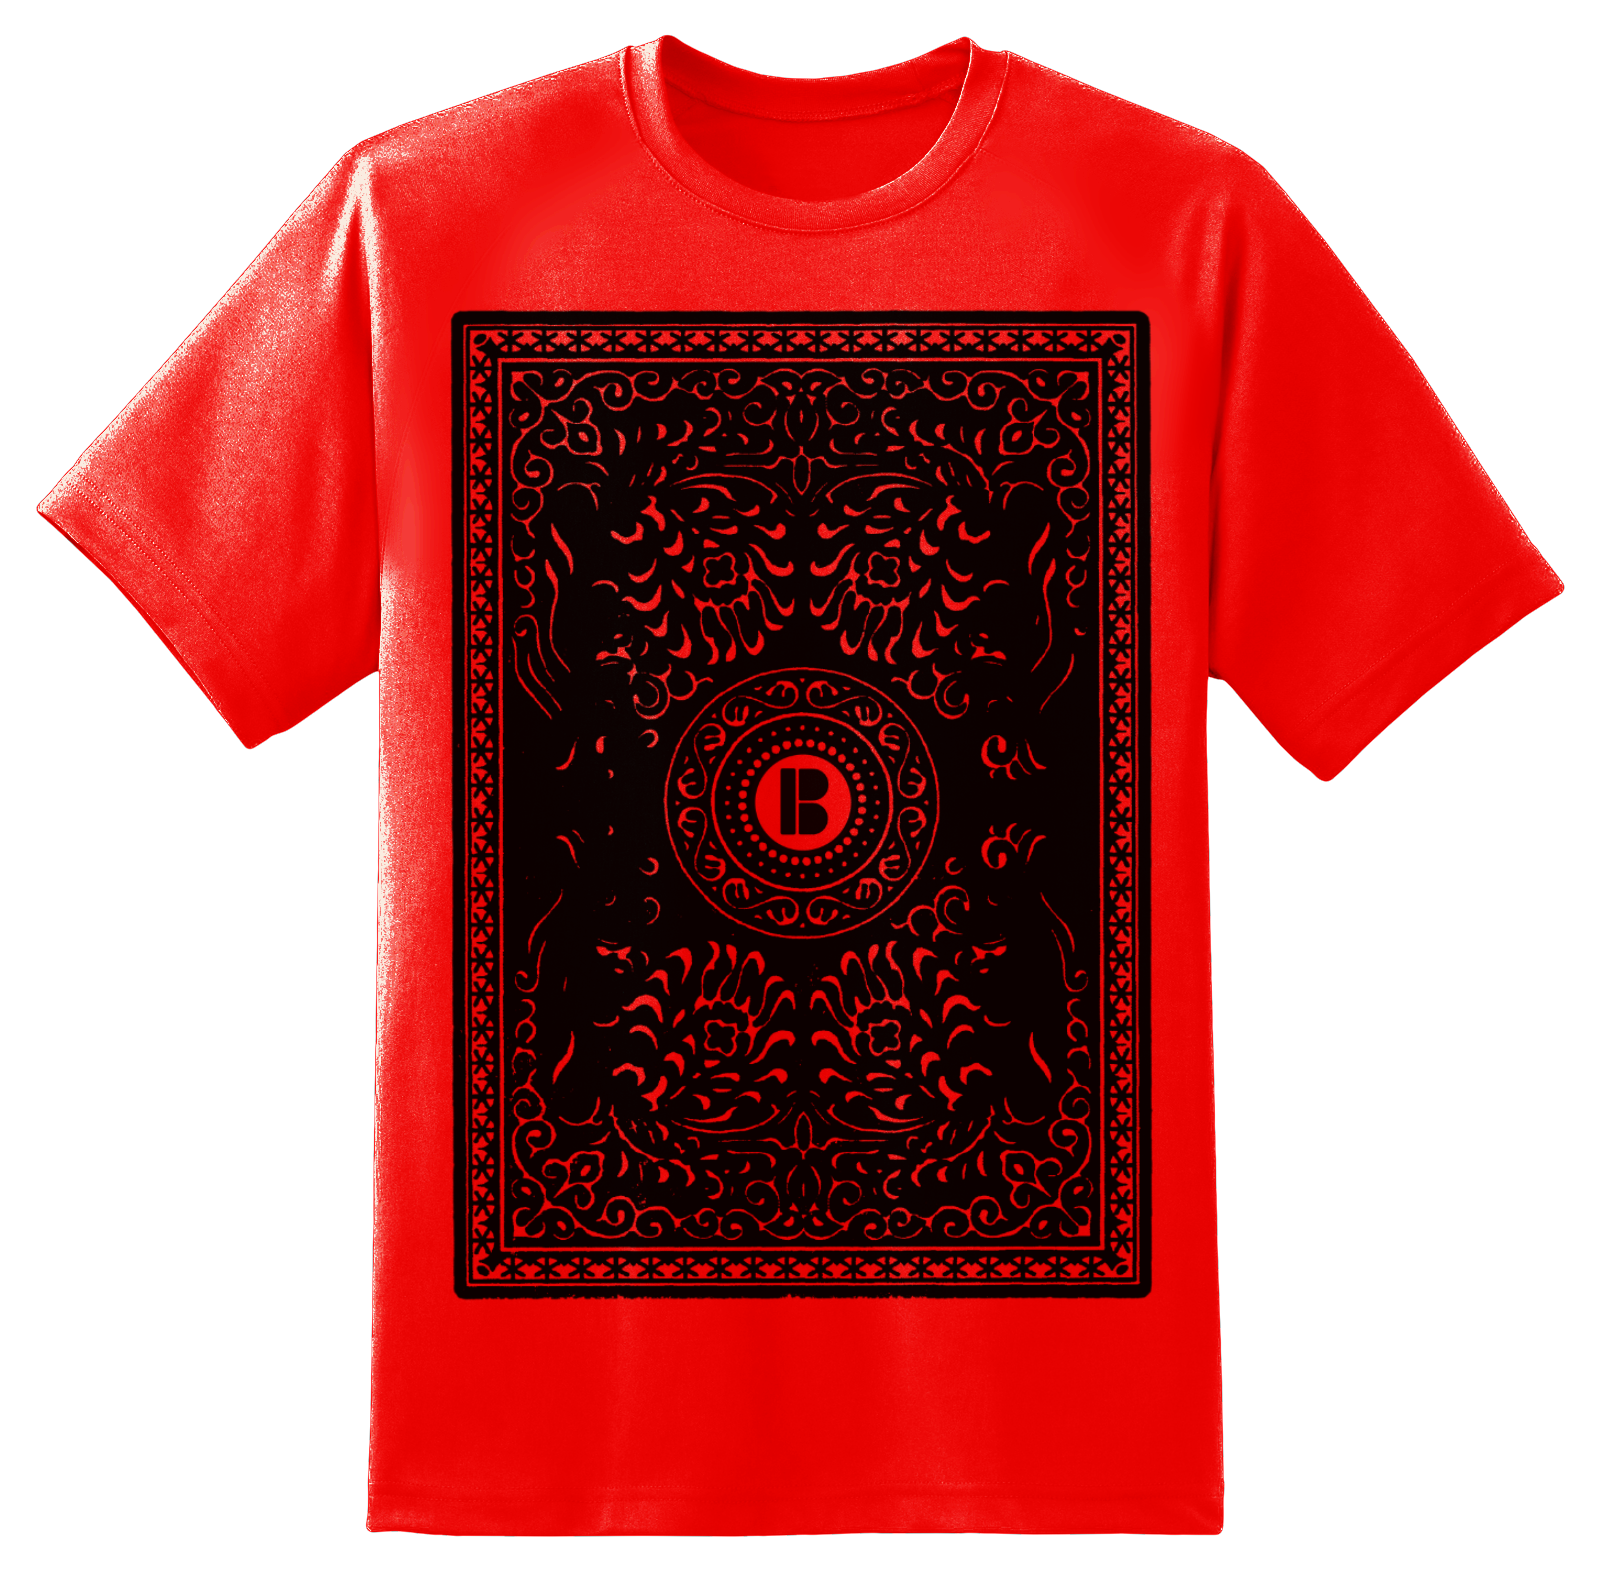 "On The Decks" - T-shirt (Red)